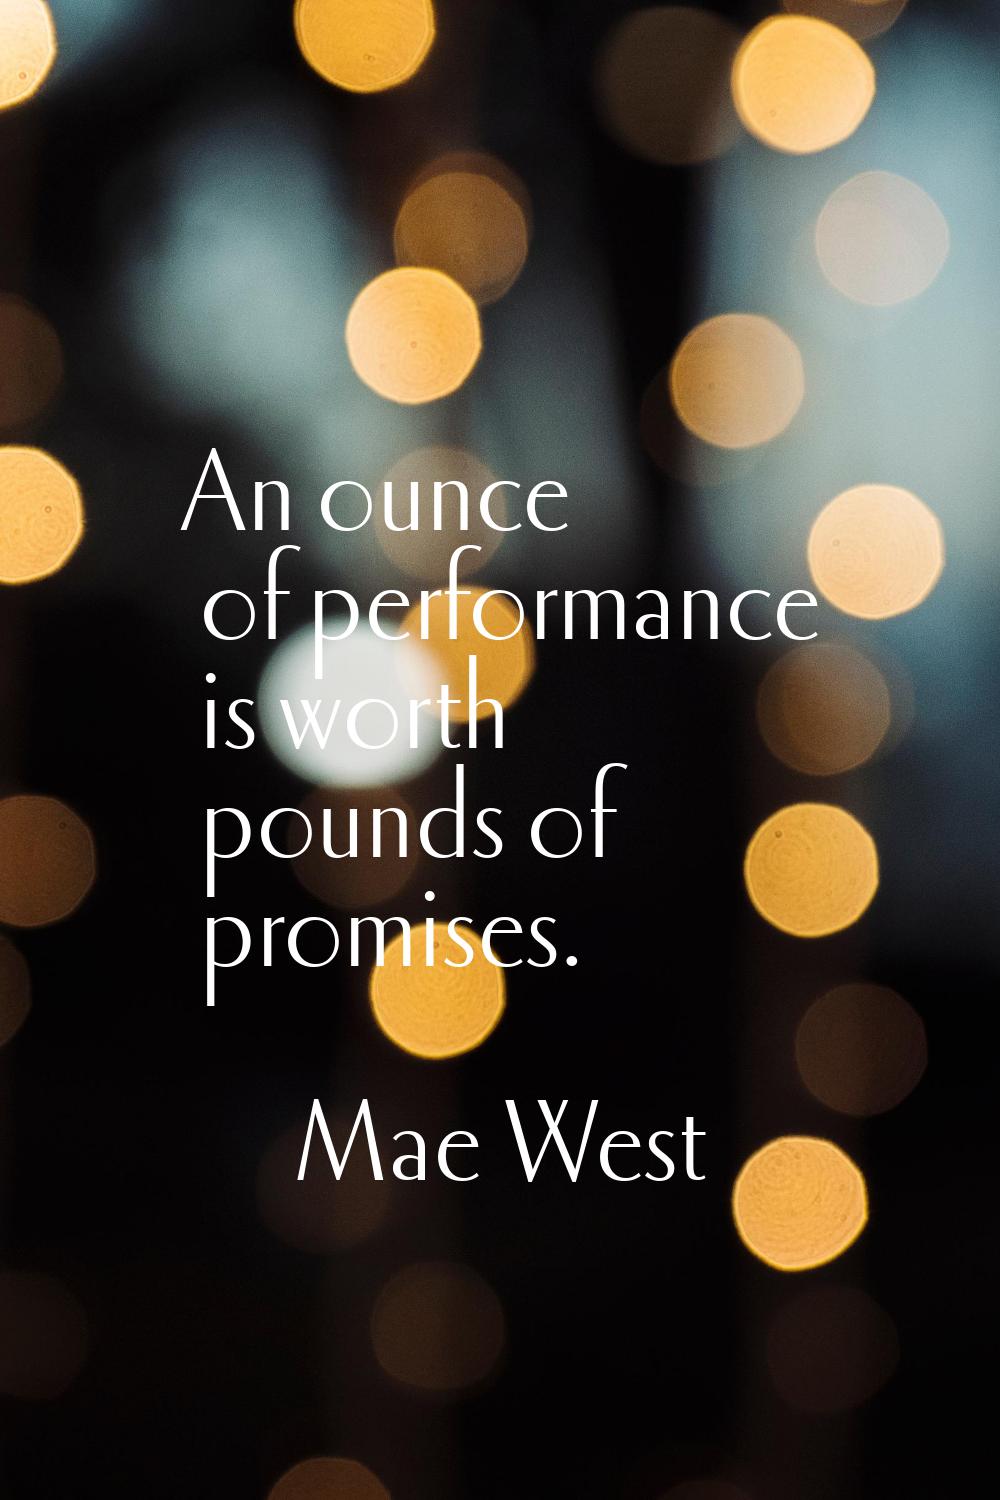 An ounce of performance is worth pounds of promises.